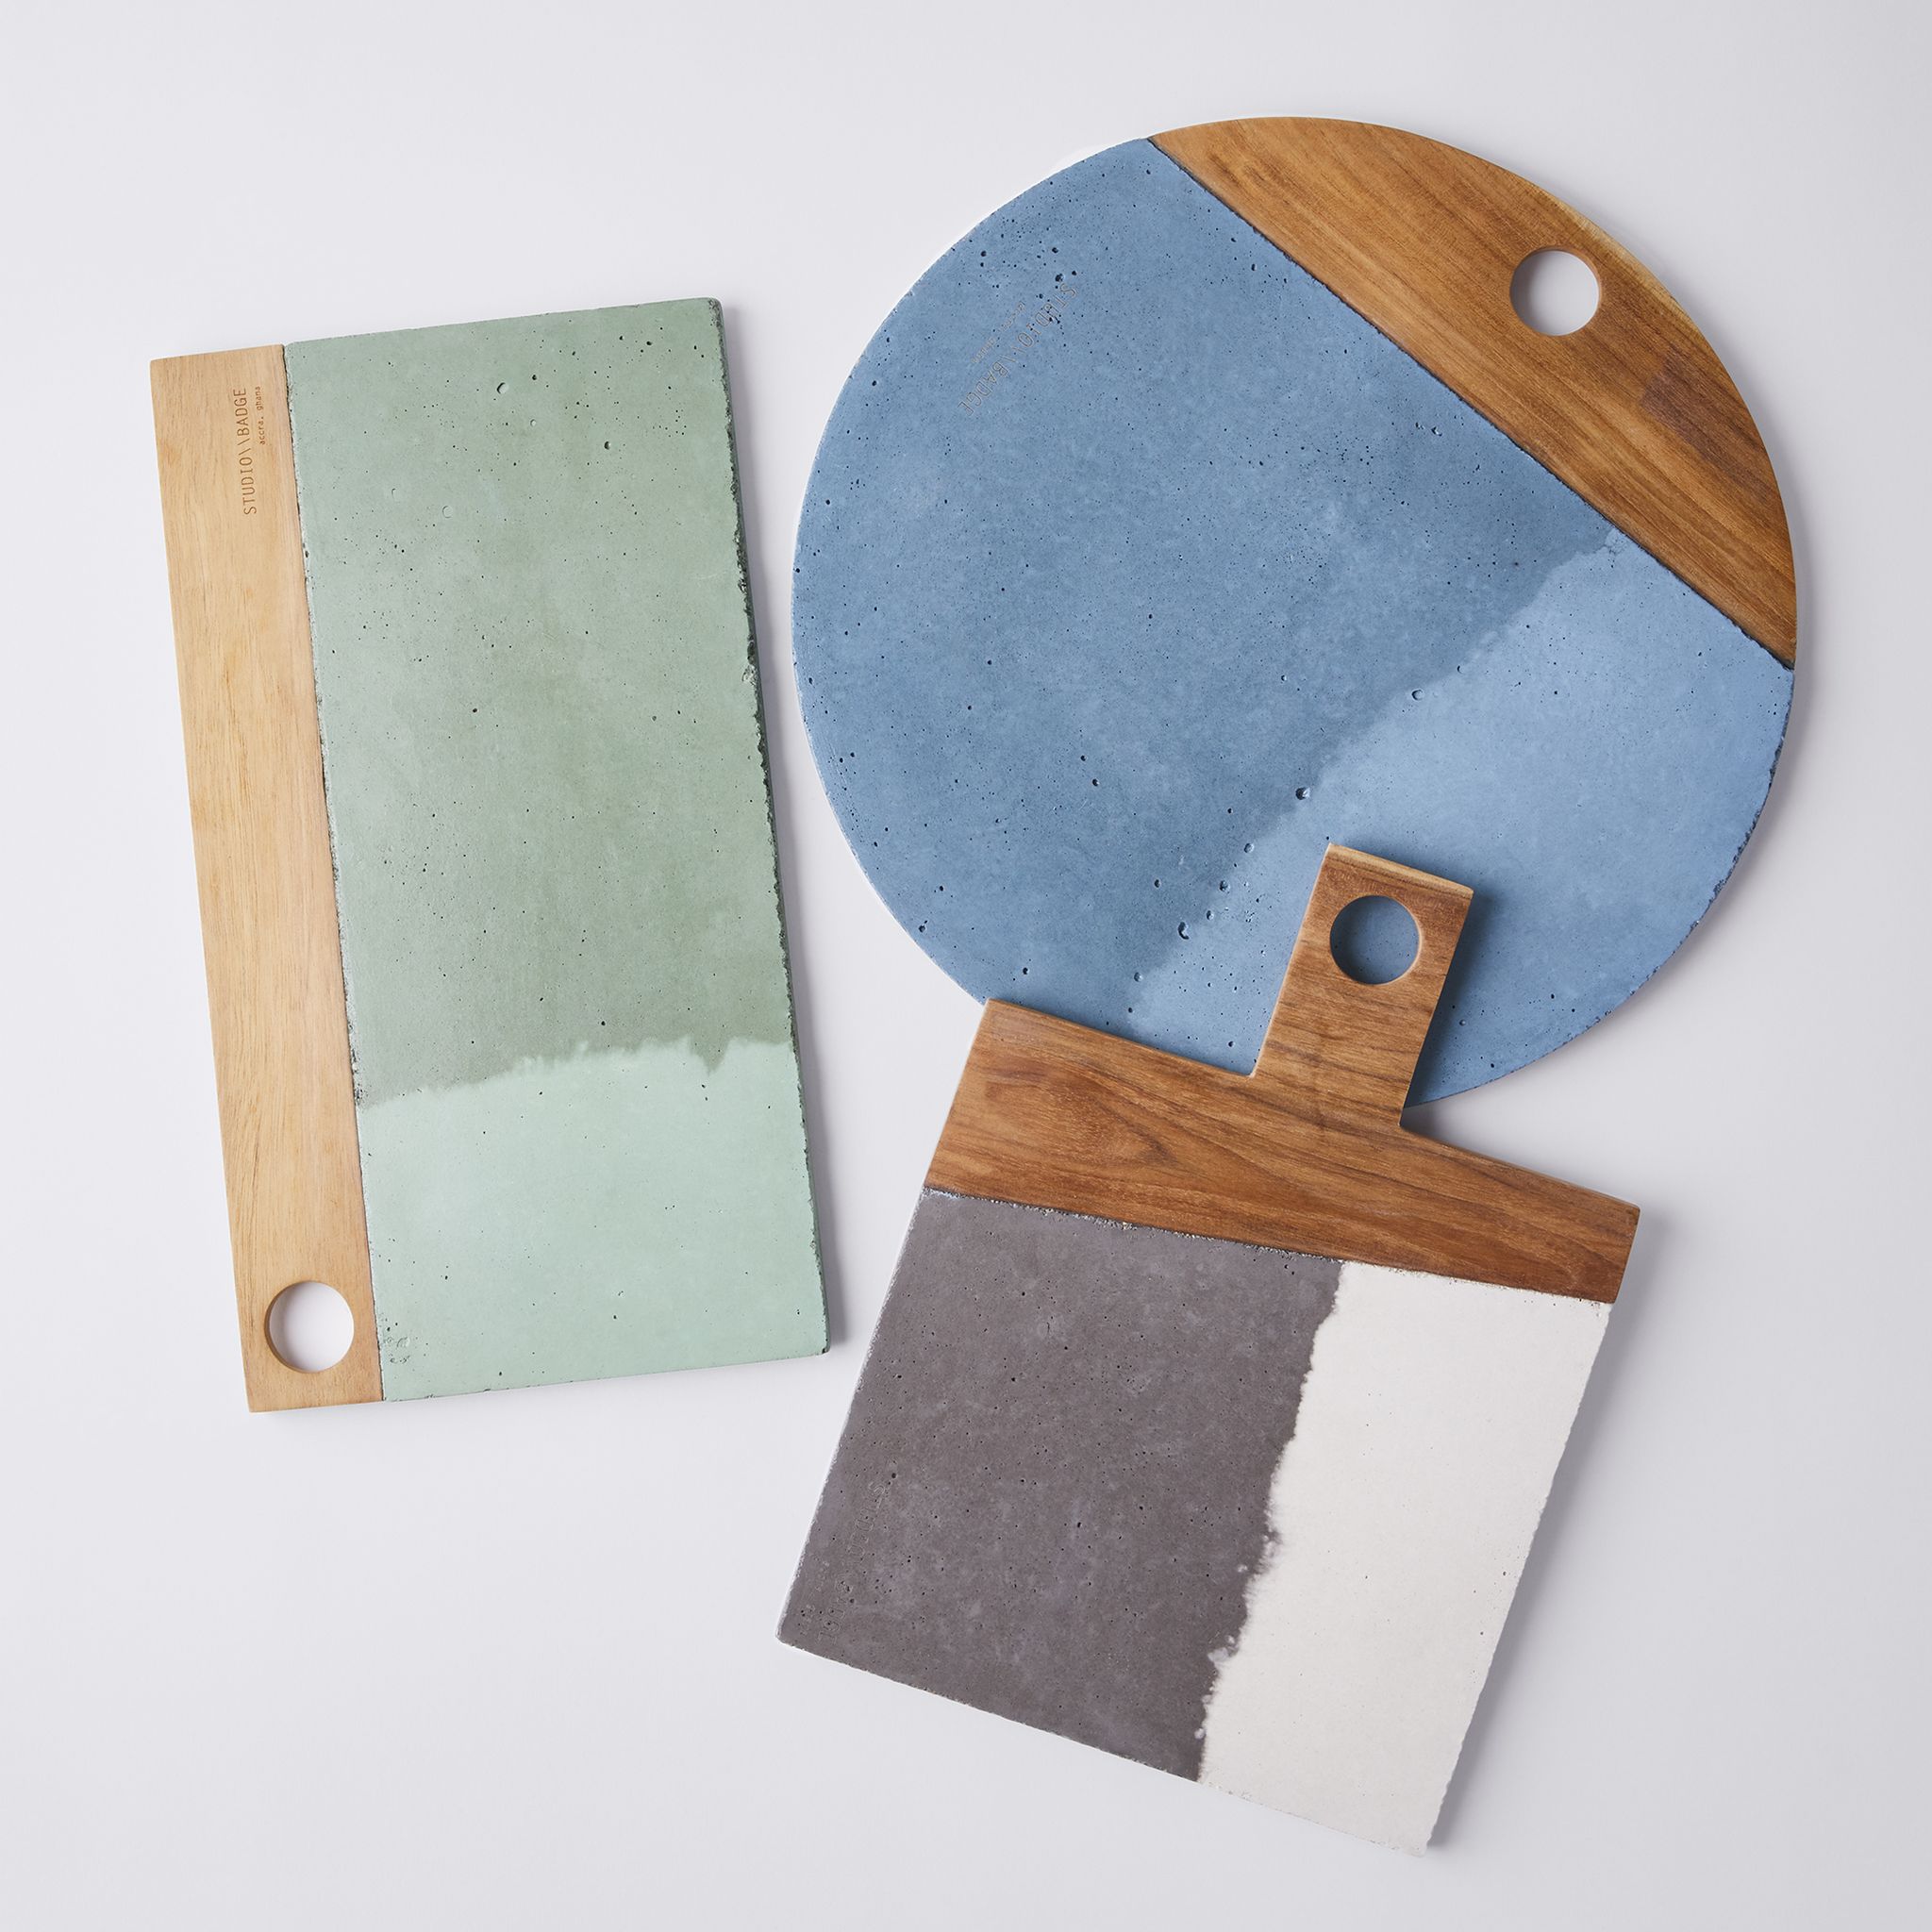 Handcrafted Wood & Concrete Serving Boards